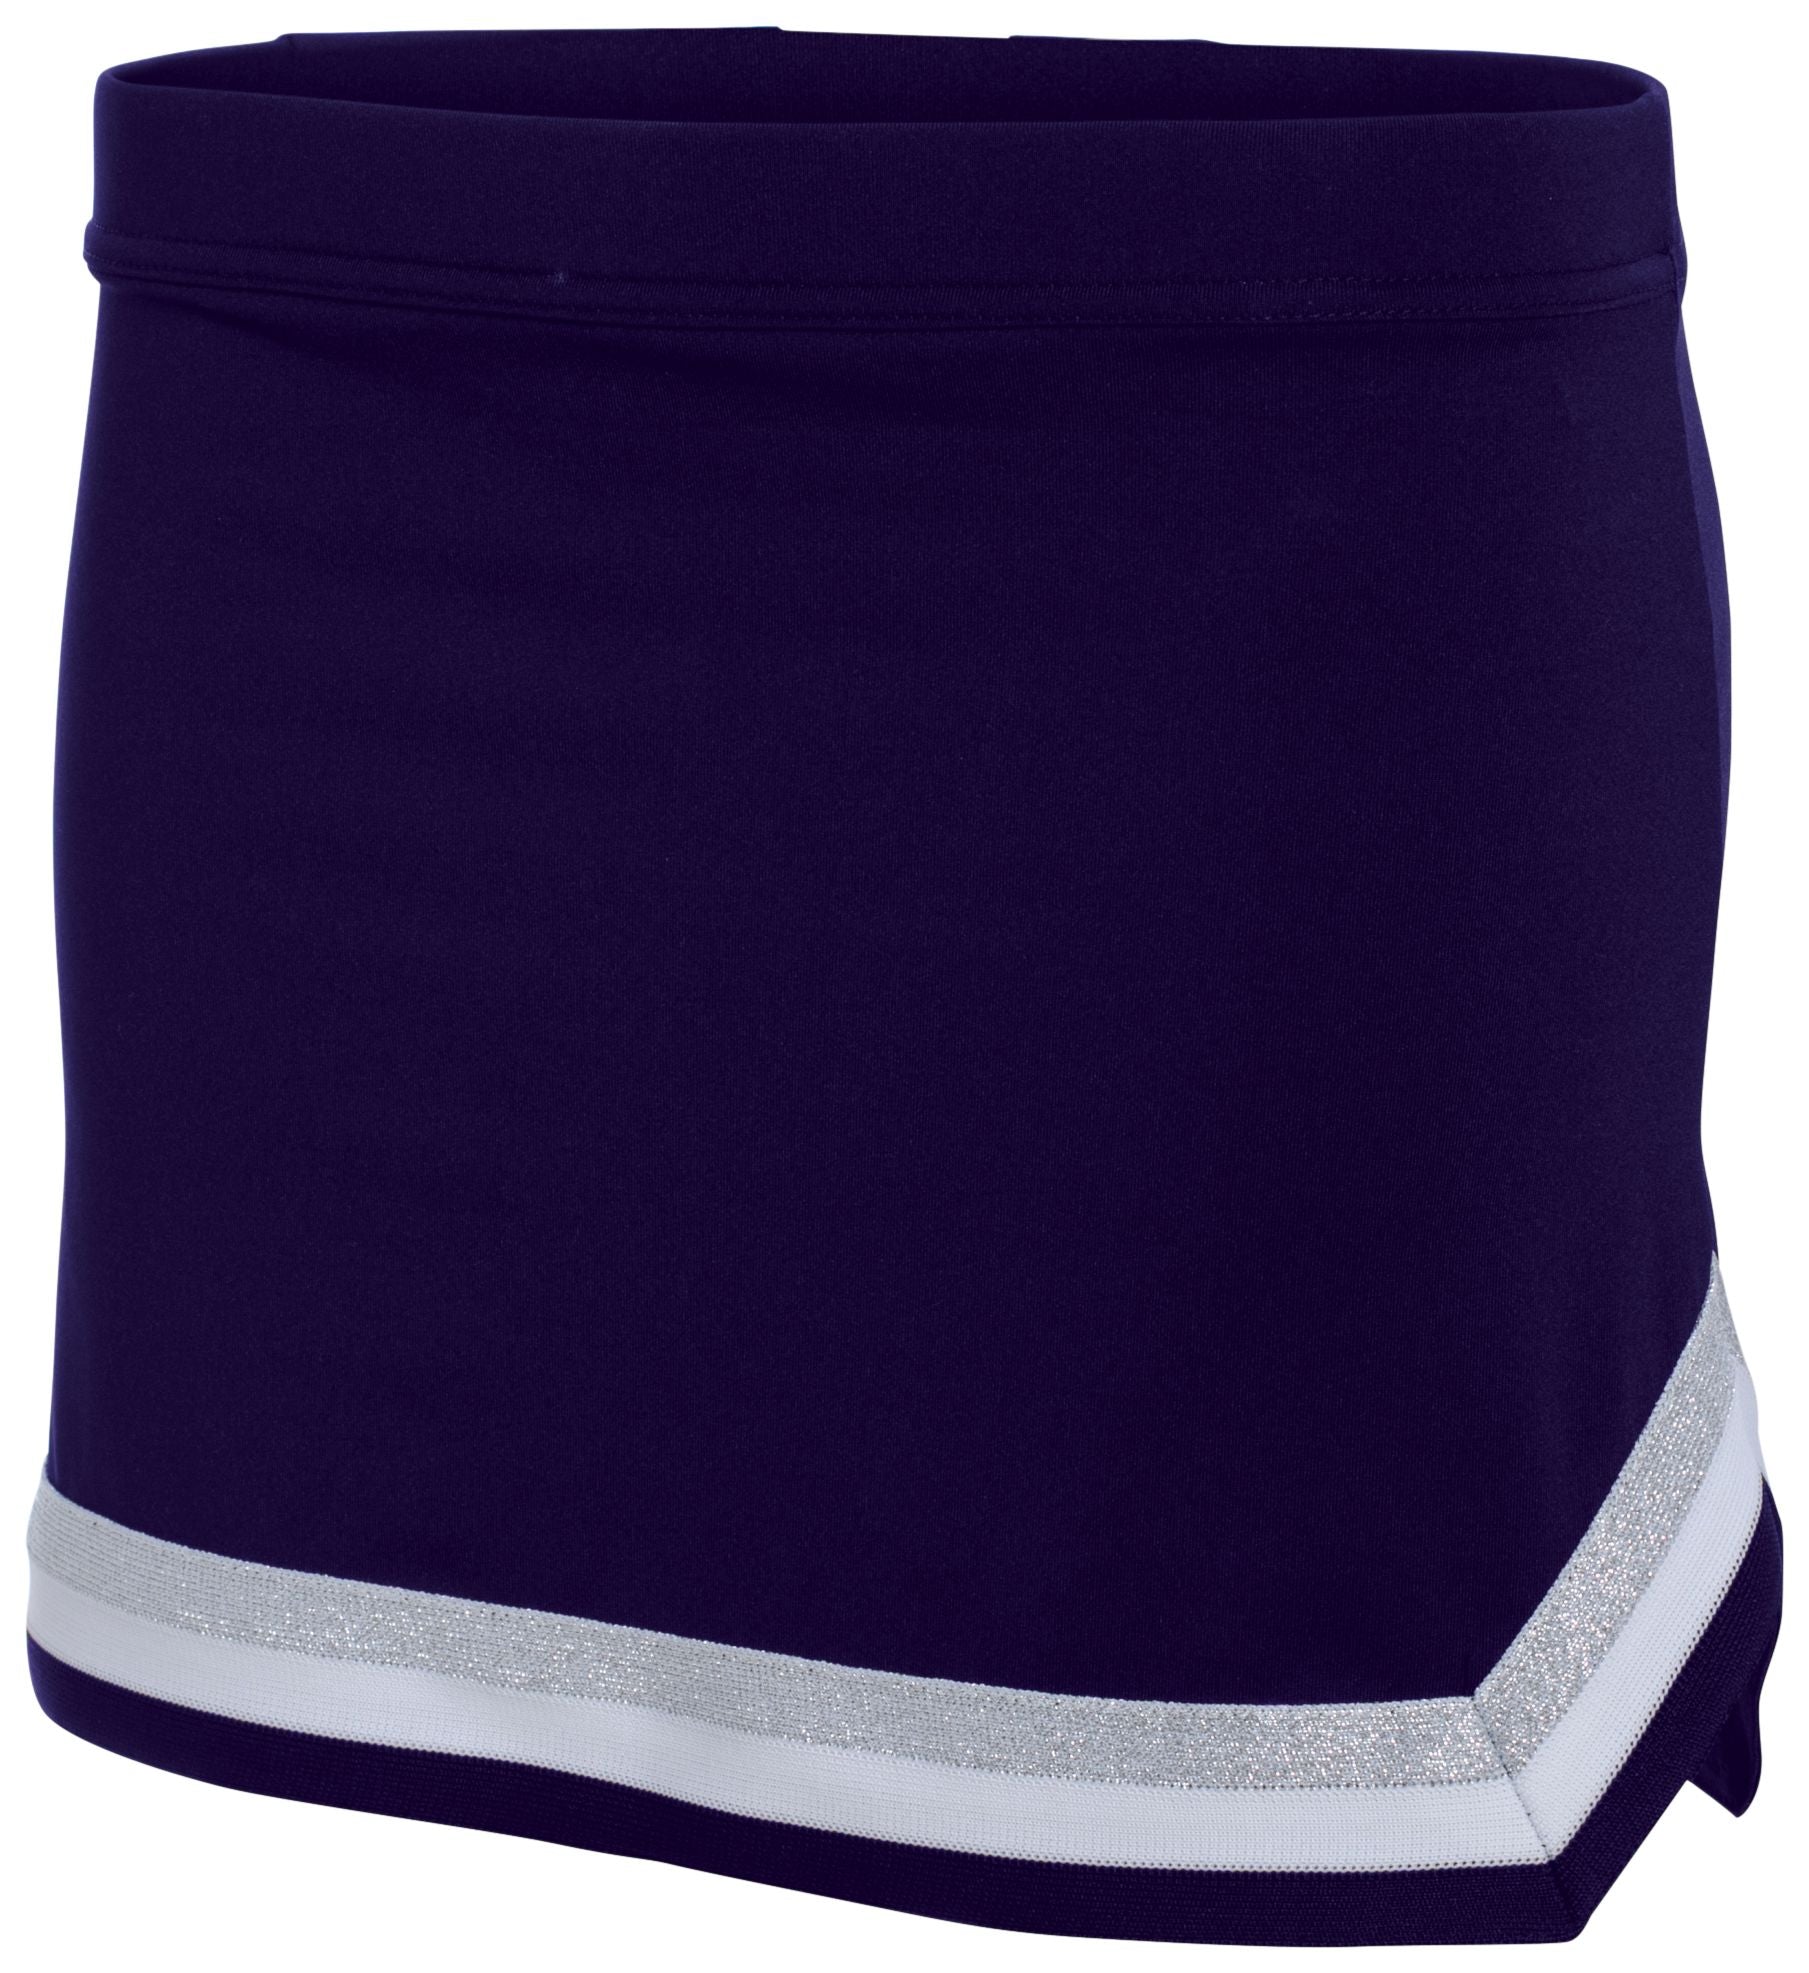 Augusta Sportswear Girls Pike Skirt in Purple/White/Metallic Silver  -Part of the Girls, Augusta-Products, Cheer product lines at KanaleyCreations.com